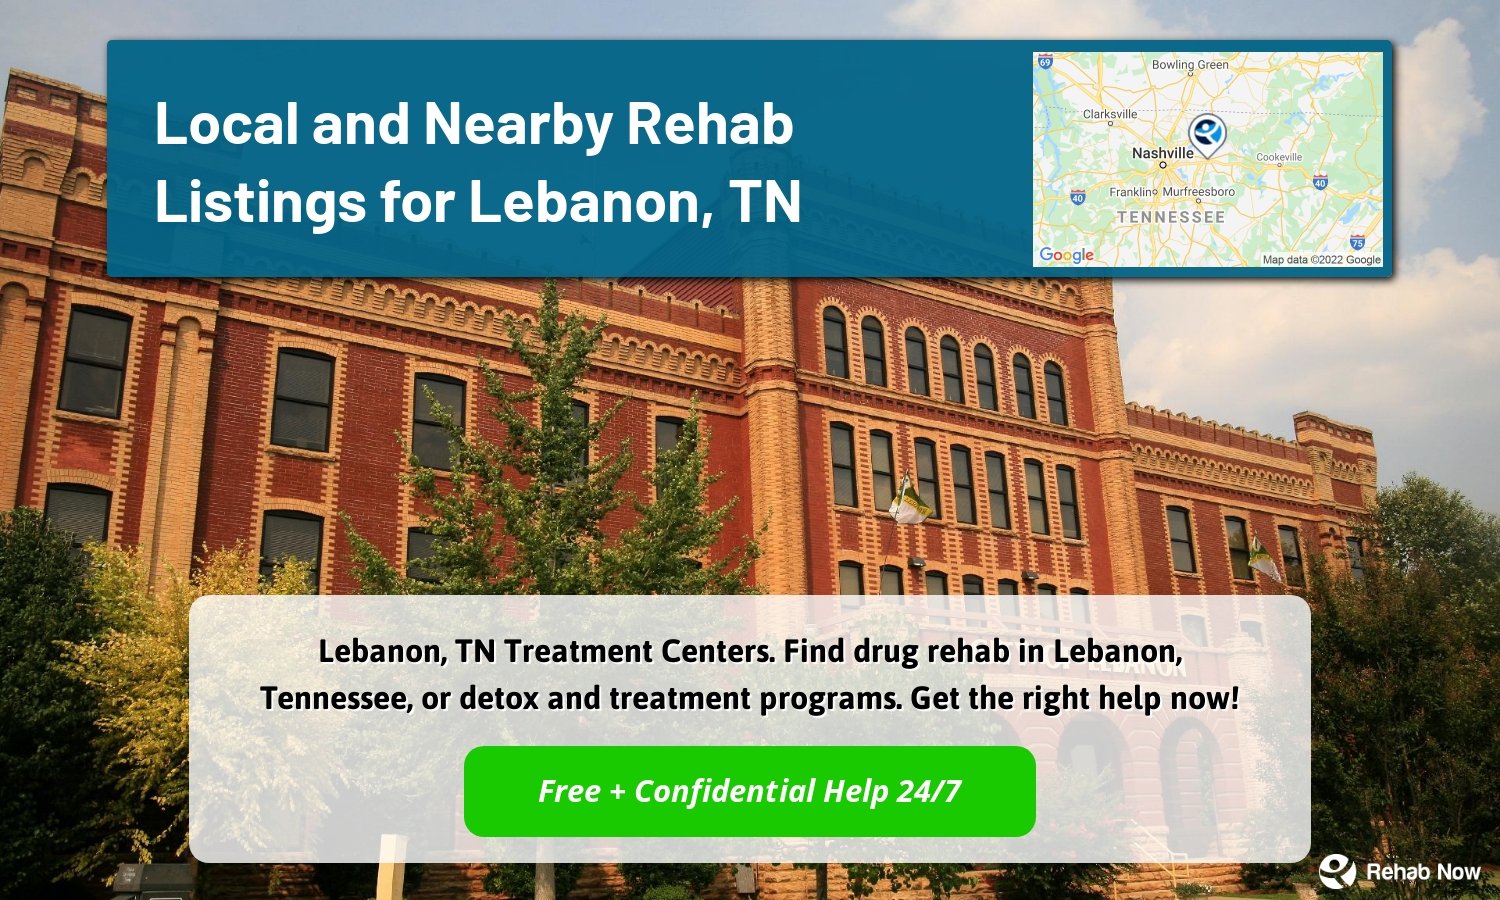 Lebanon, TN Treatment Centers. Find drug rehab in Lebanon, Tennessee, or detox and treatment programs. Get the right help now!